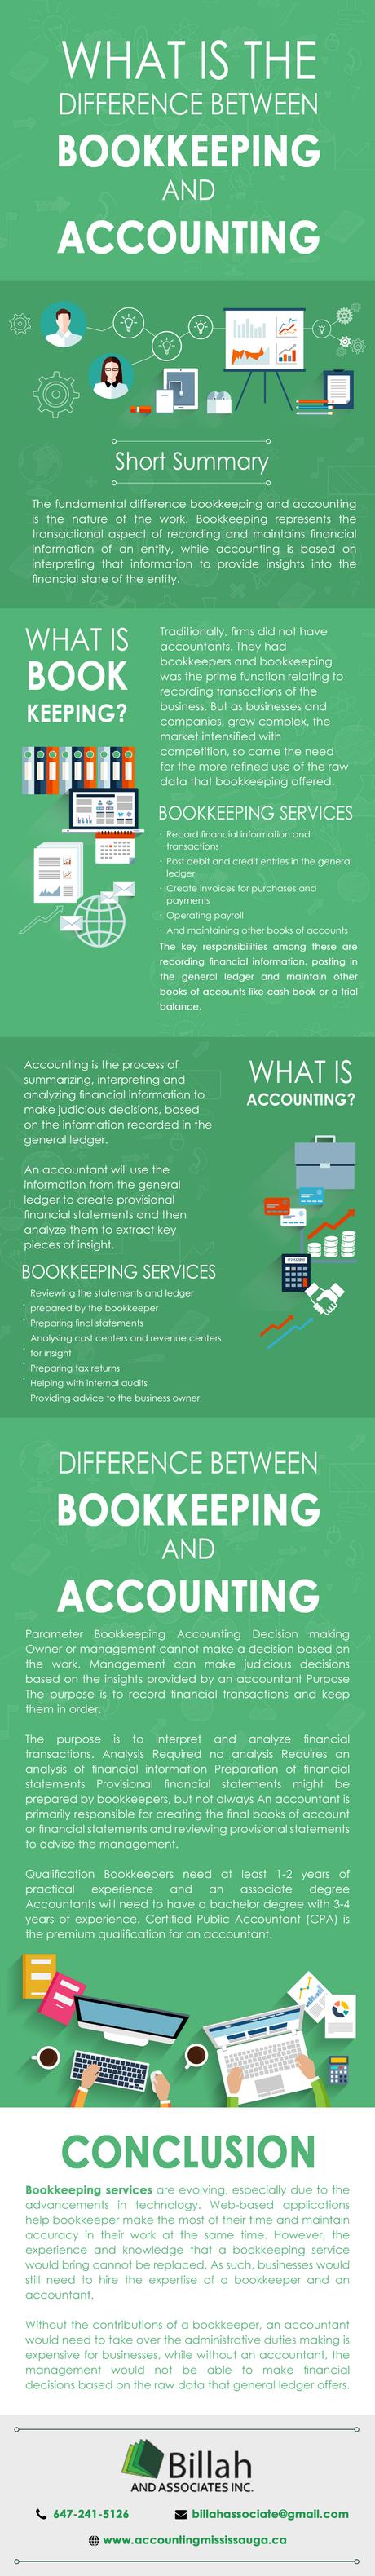 bookkeeping vs accounting courses